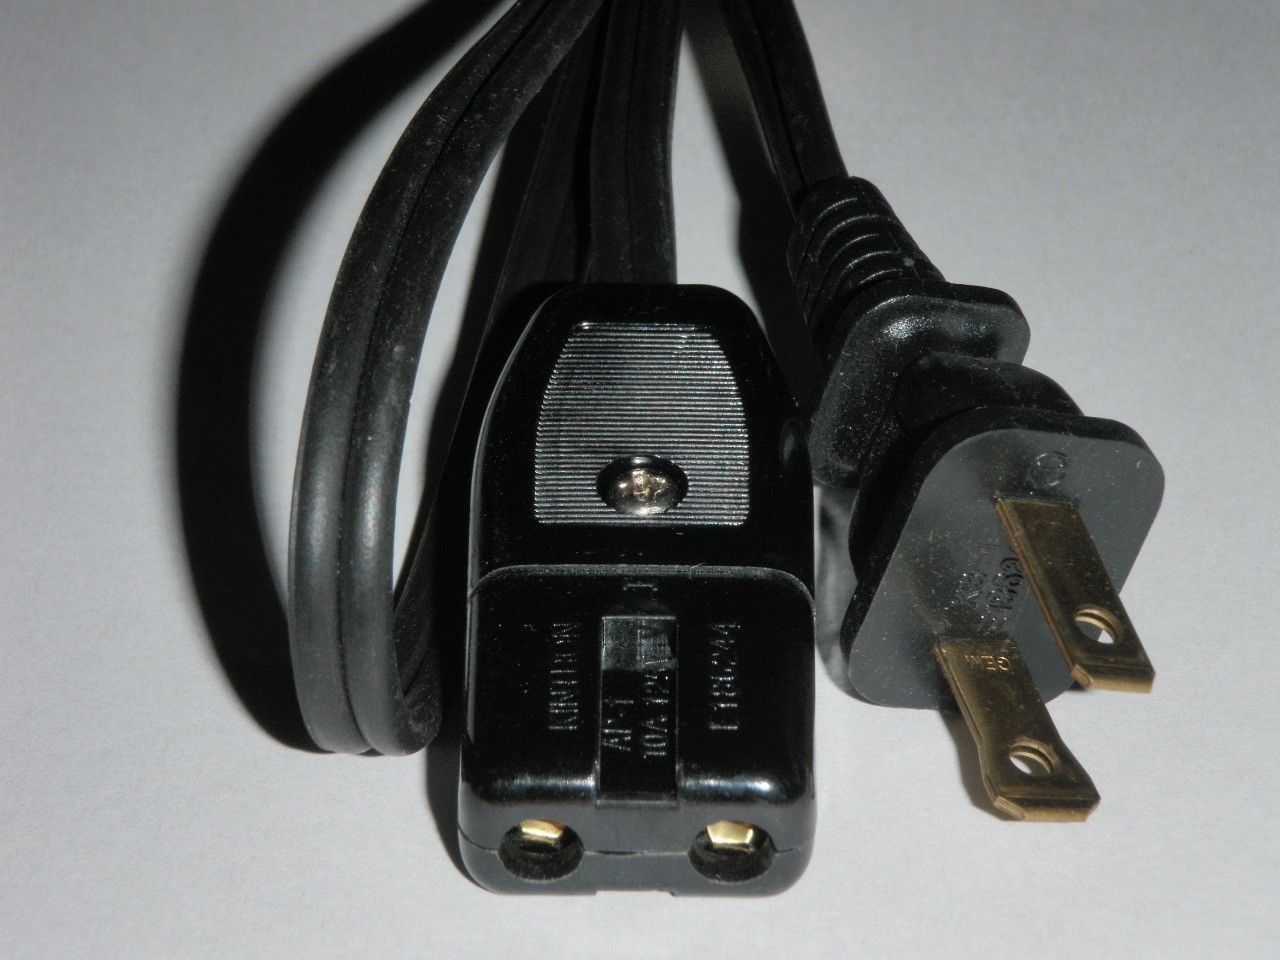 Power Cord for Proctor Silex Coffee Percolator Models 70151 (2pin 36") - $15.67